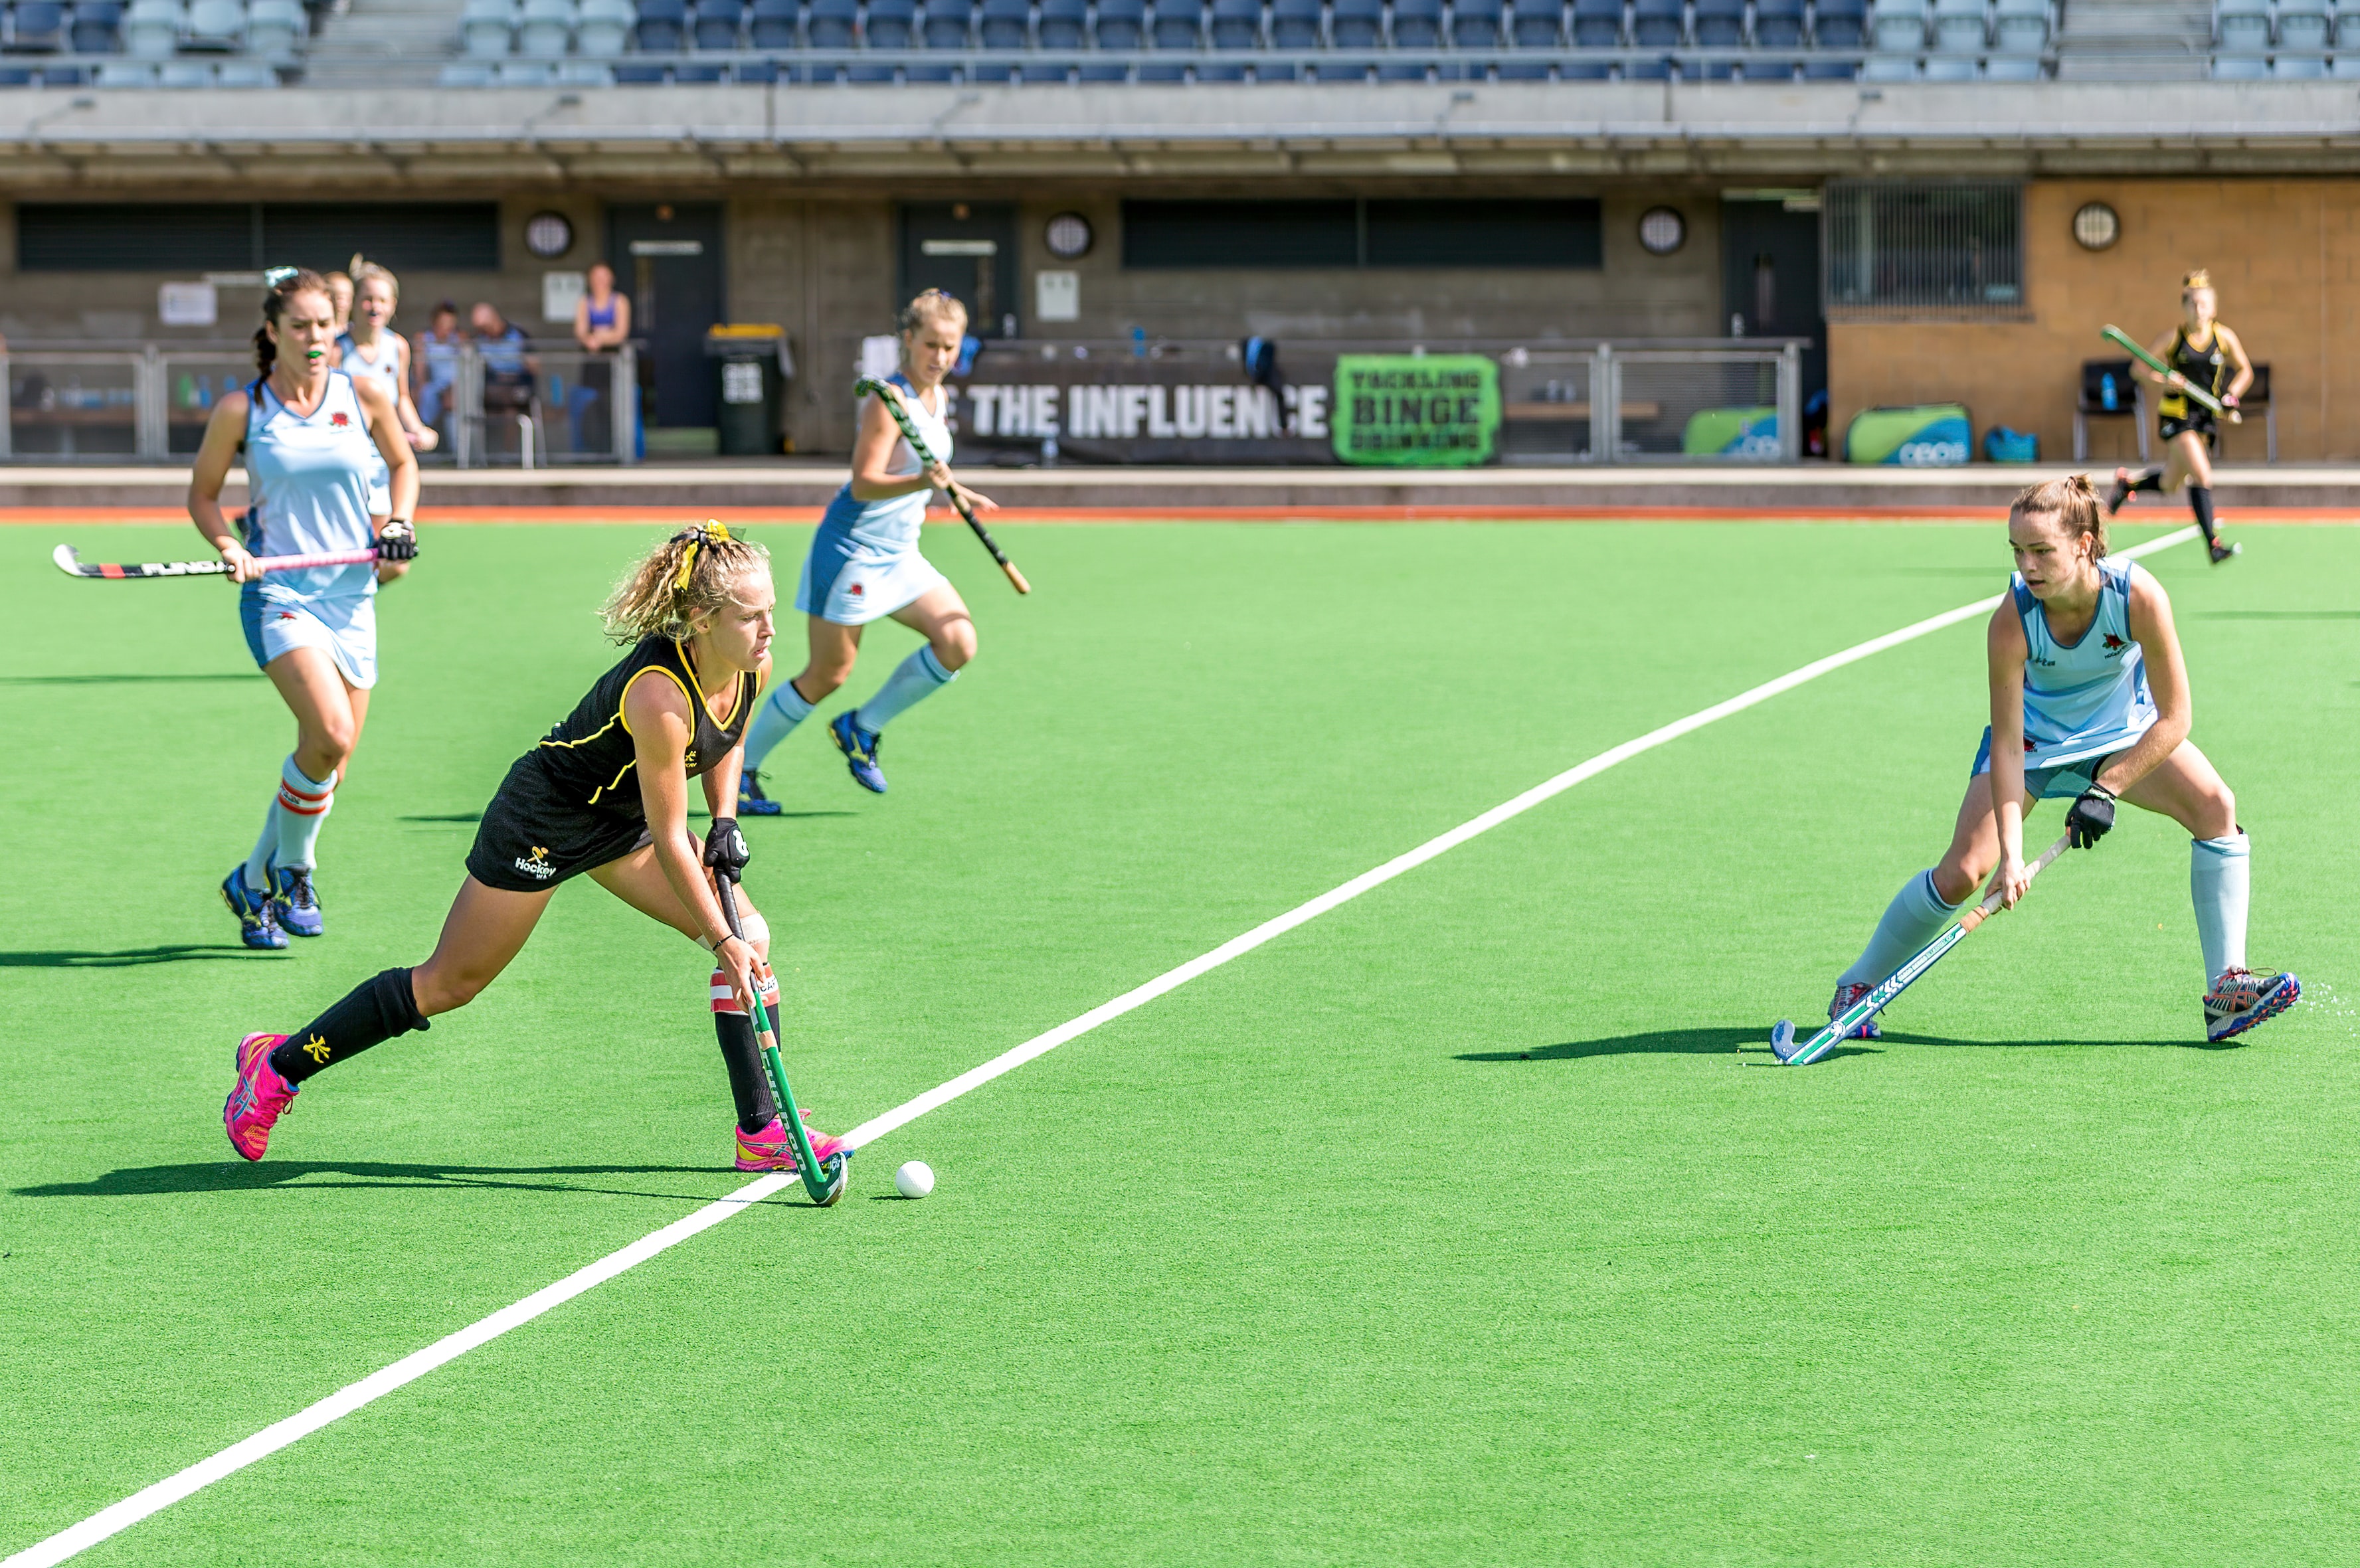 Players chase the ball in a women's hockey match.